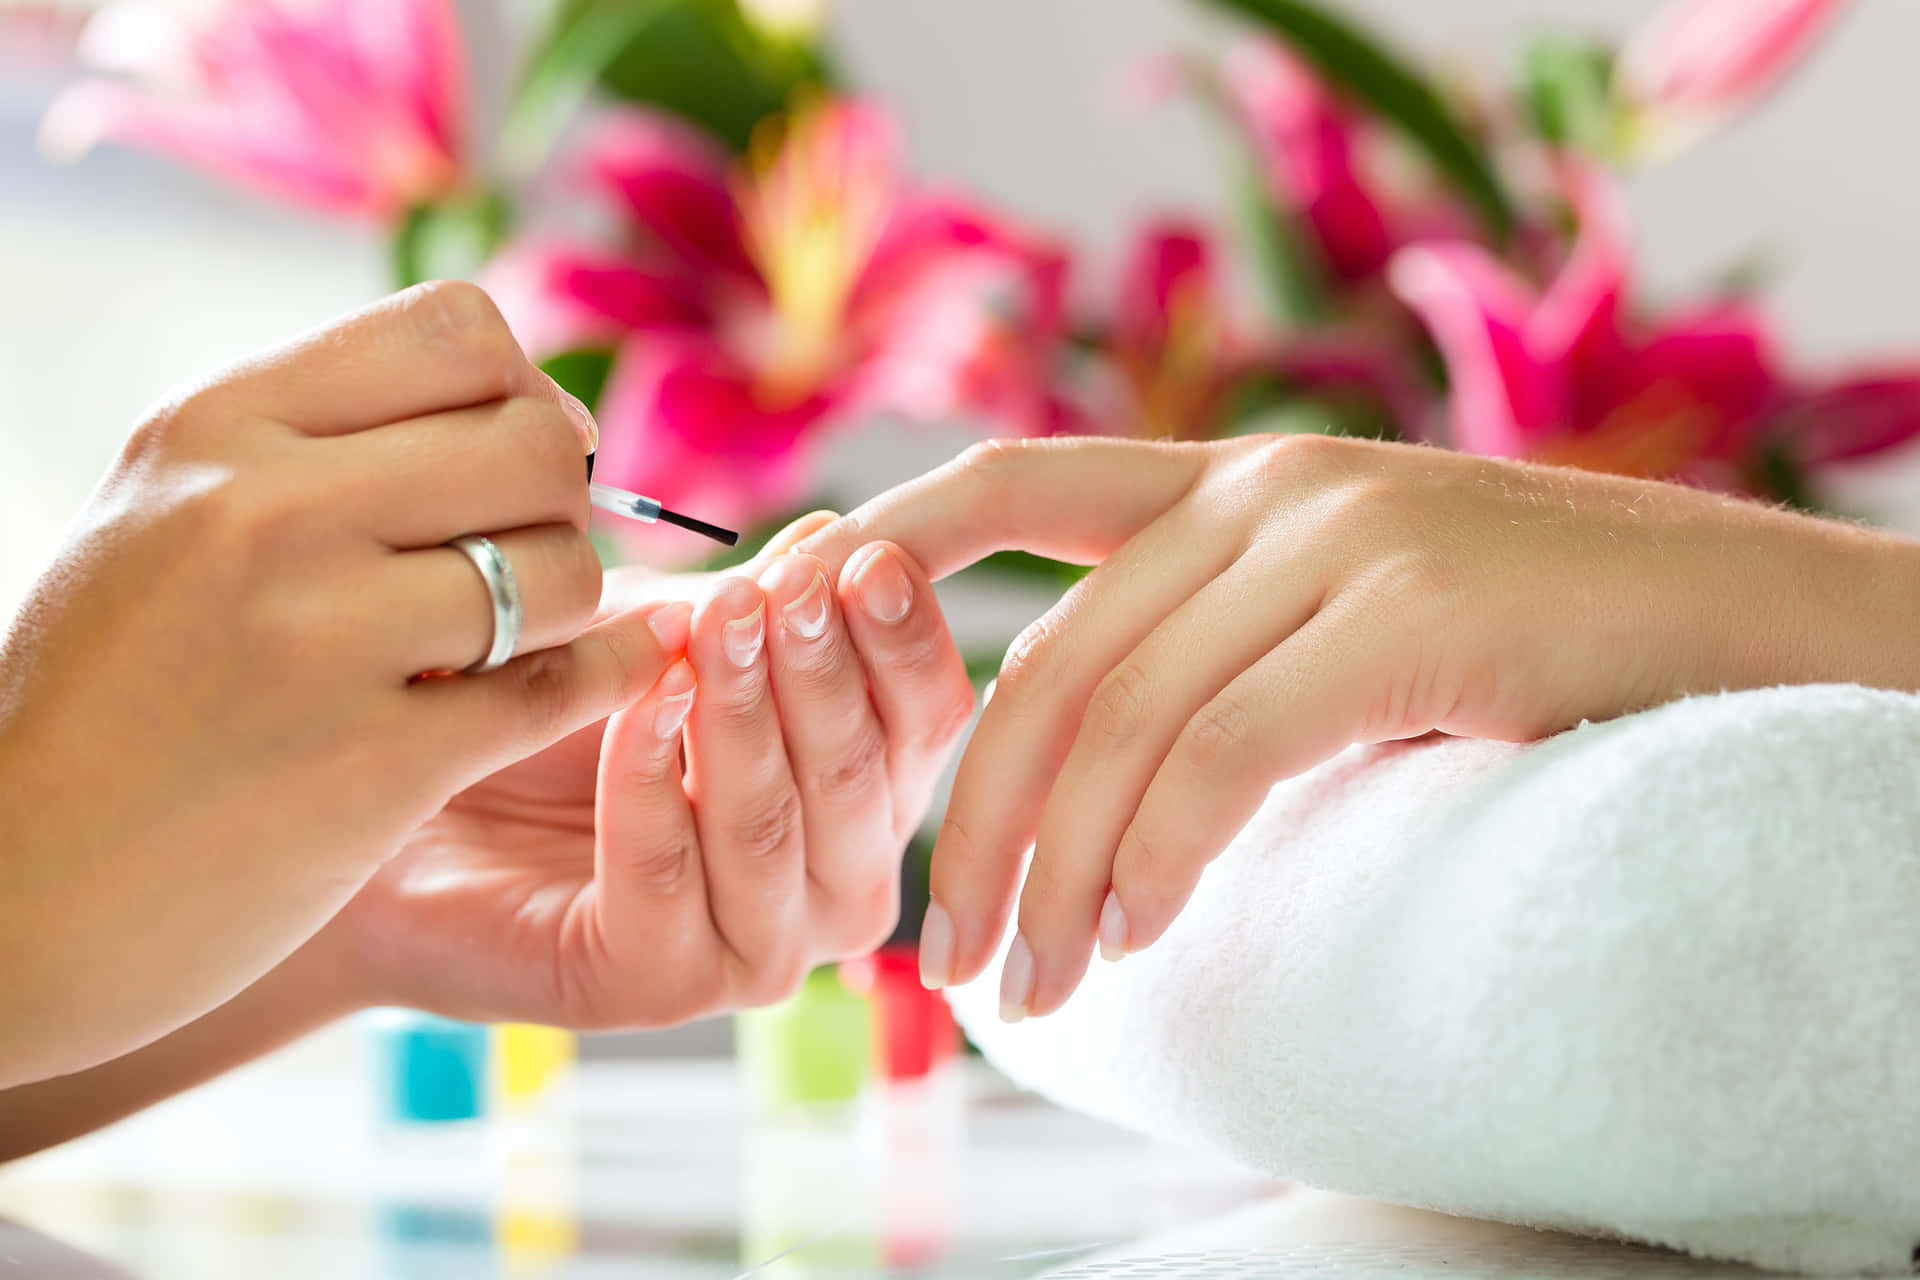 Pamper your hands with a beautiful manicure